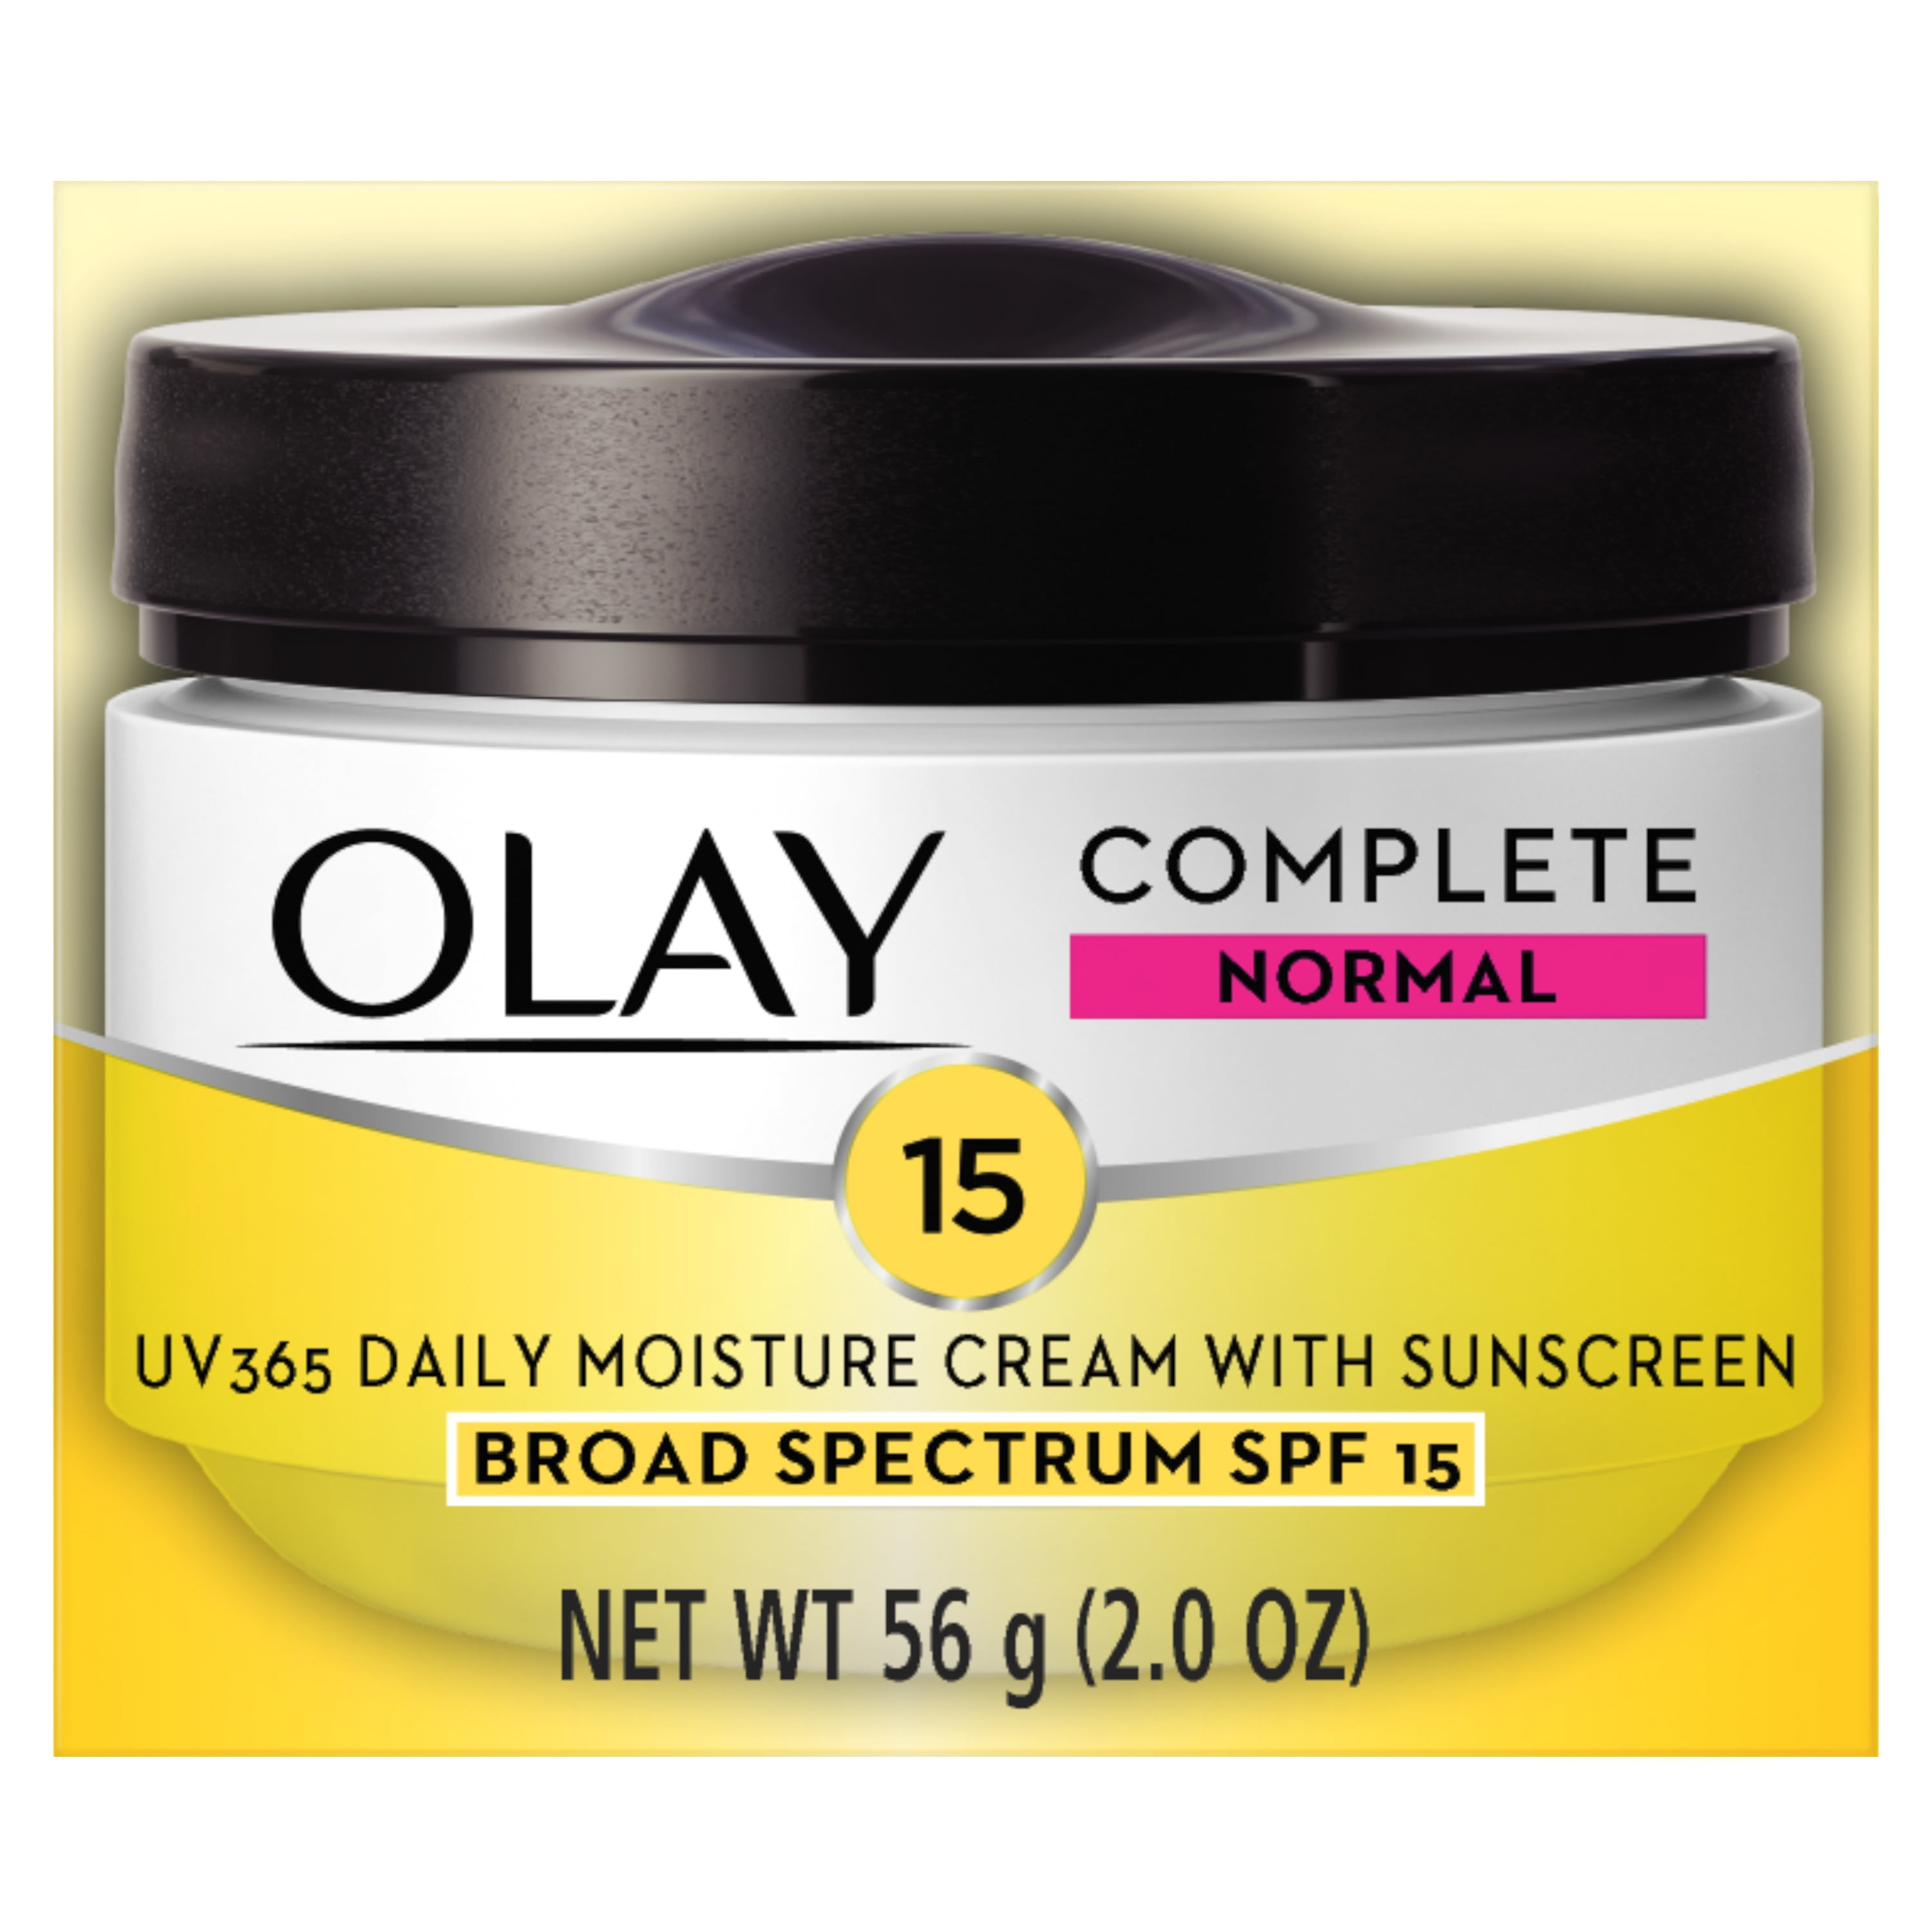 Olay Complete Cream Moisturizer with SPF 15 Normal, 2.0 oz